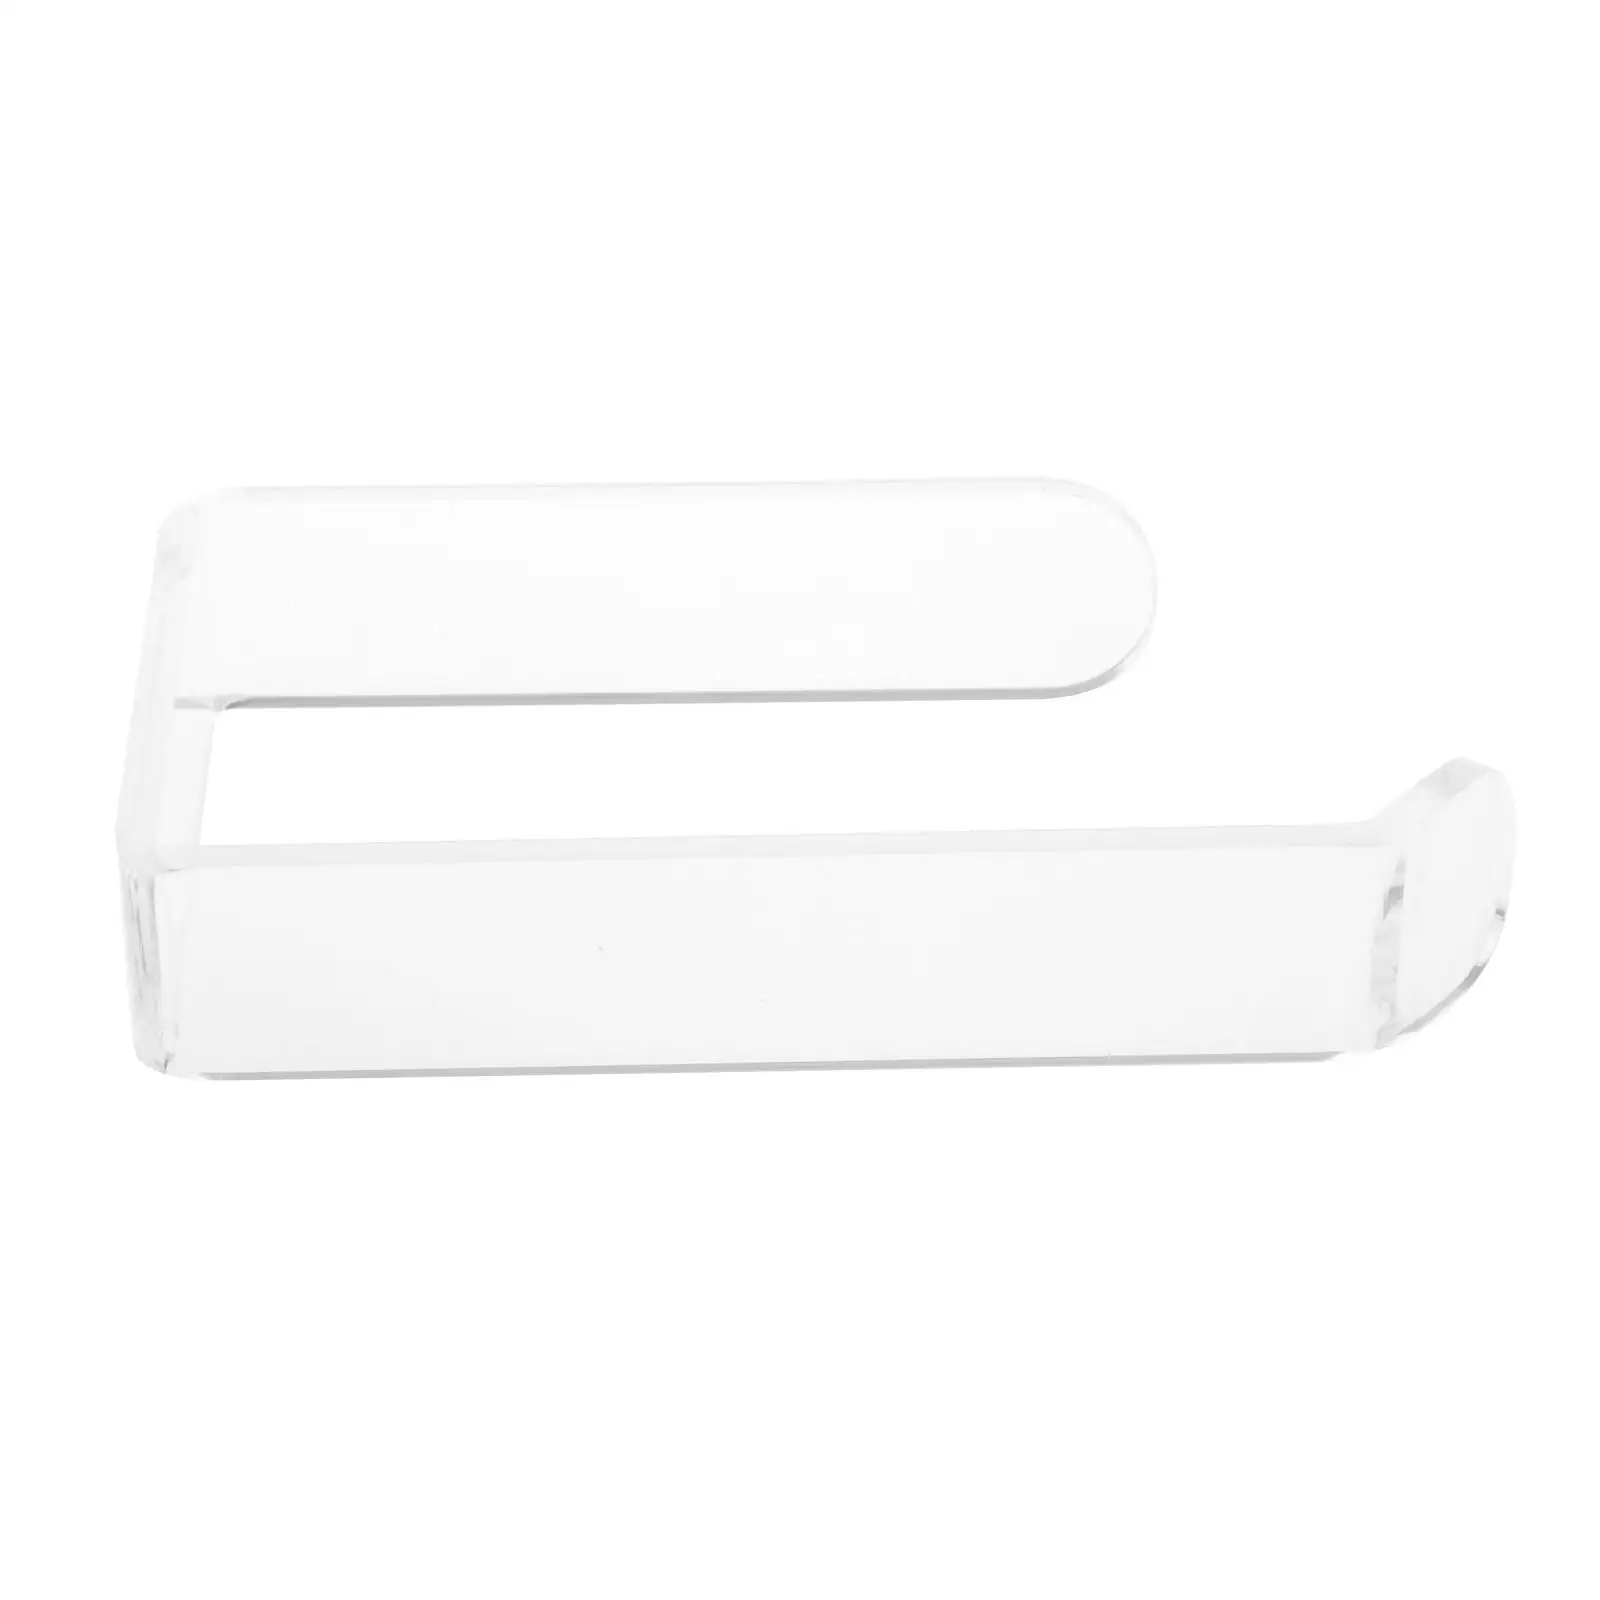 Punch-free Acrylic Toilet Roll Holder Kitchen Paper Holder for Bathroom Toilet Paper Holder Hanger Stick on Wall Tile